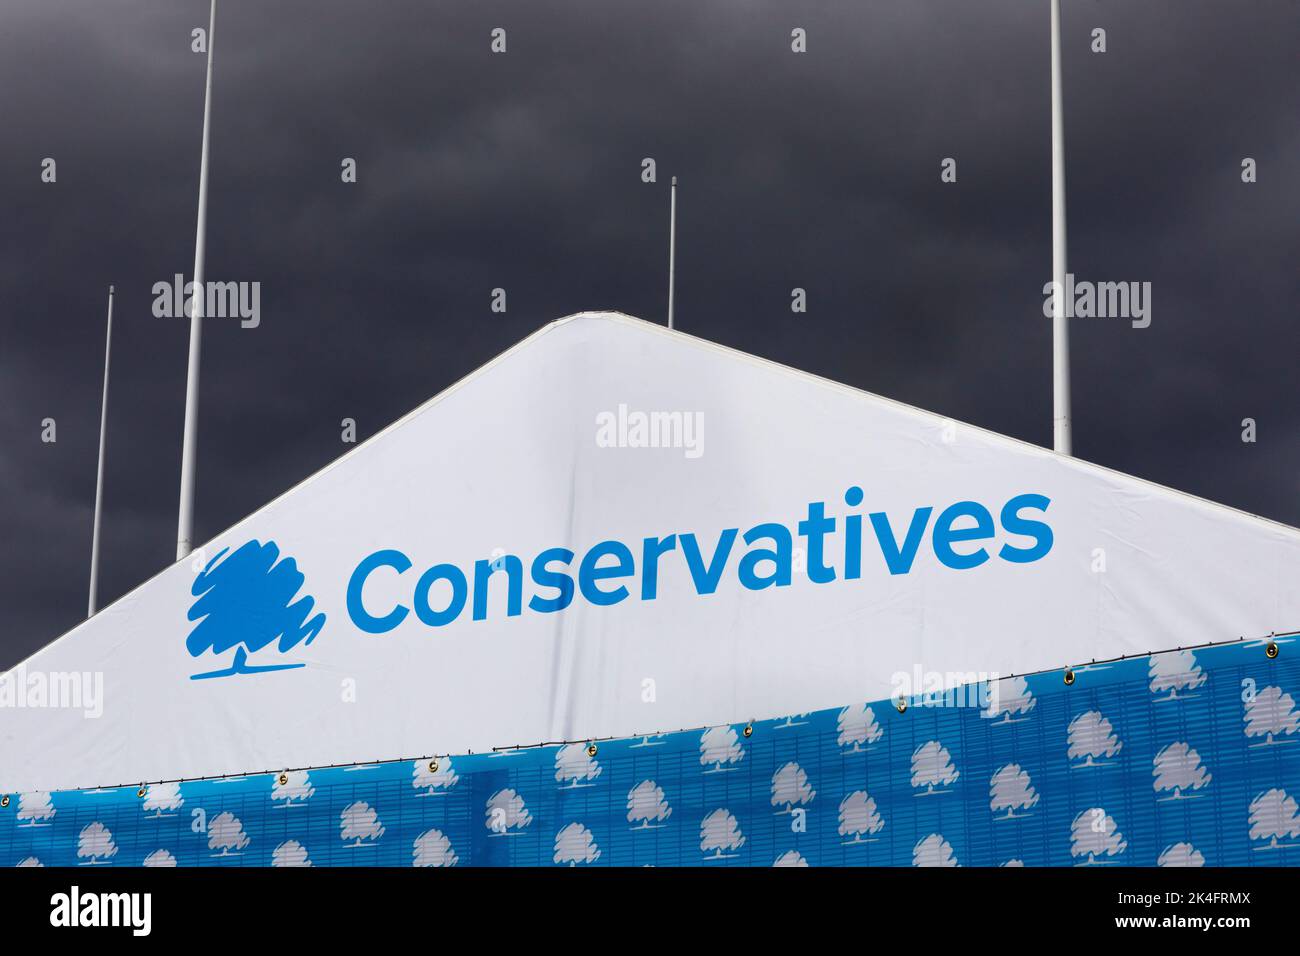 Darkening skies over the Conservative party Stock Photo